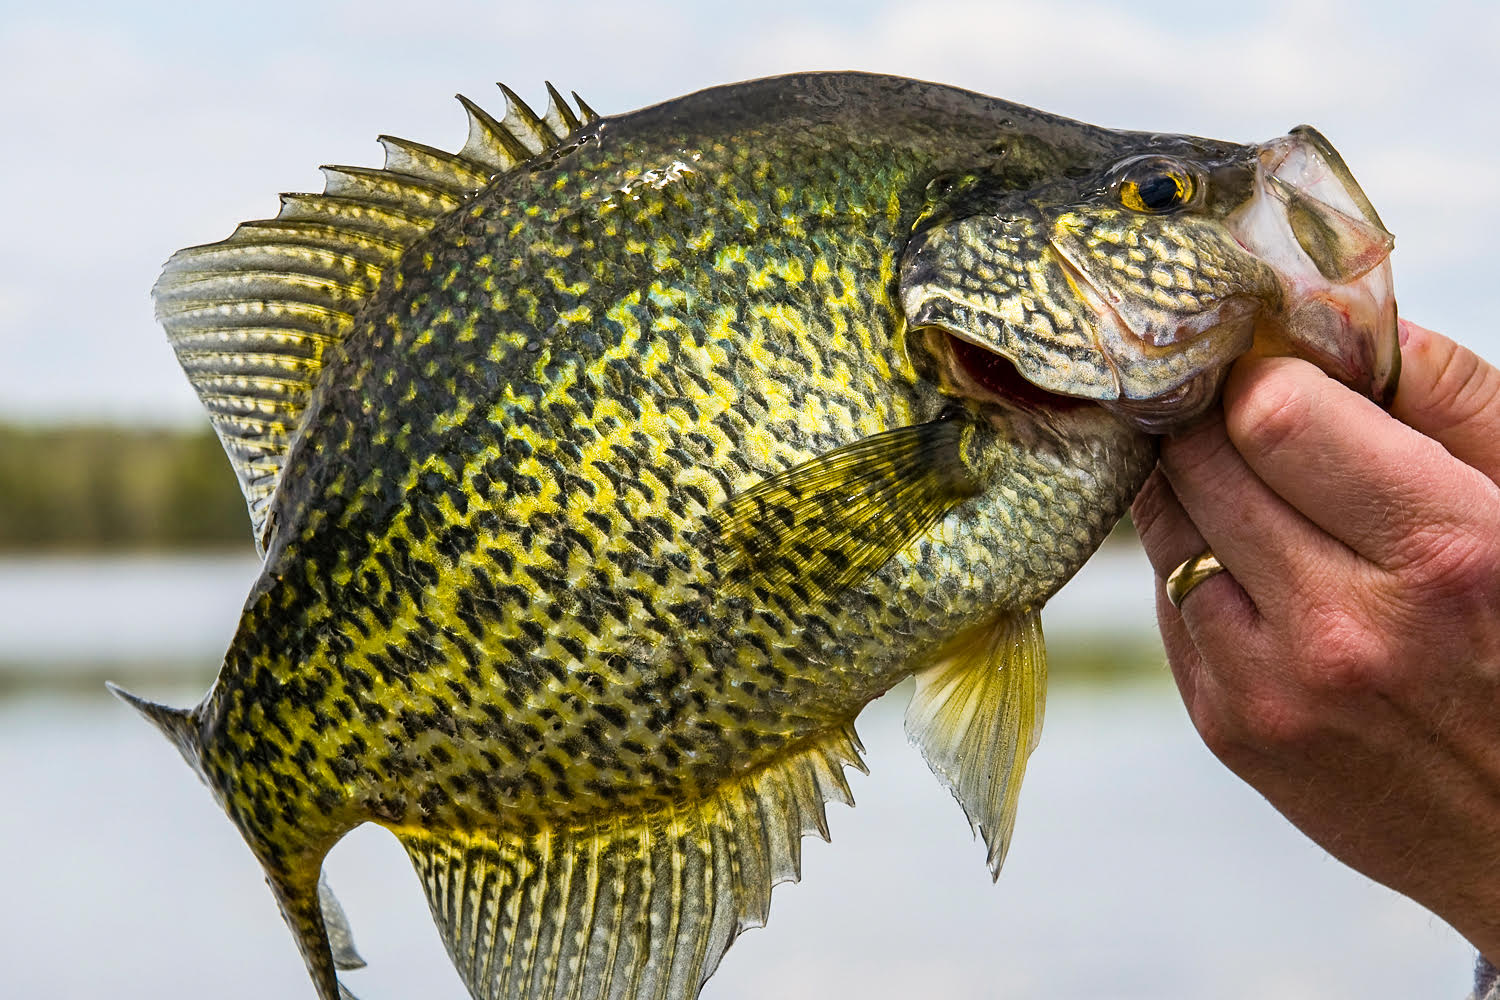 The BEST Technique for Slab Crappie (CATCH & COOK) 